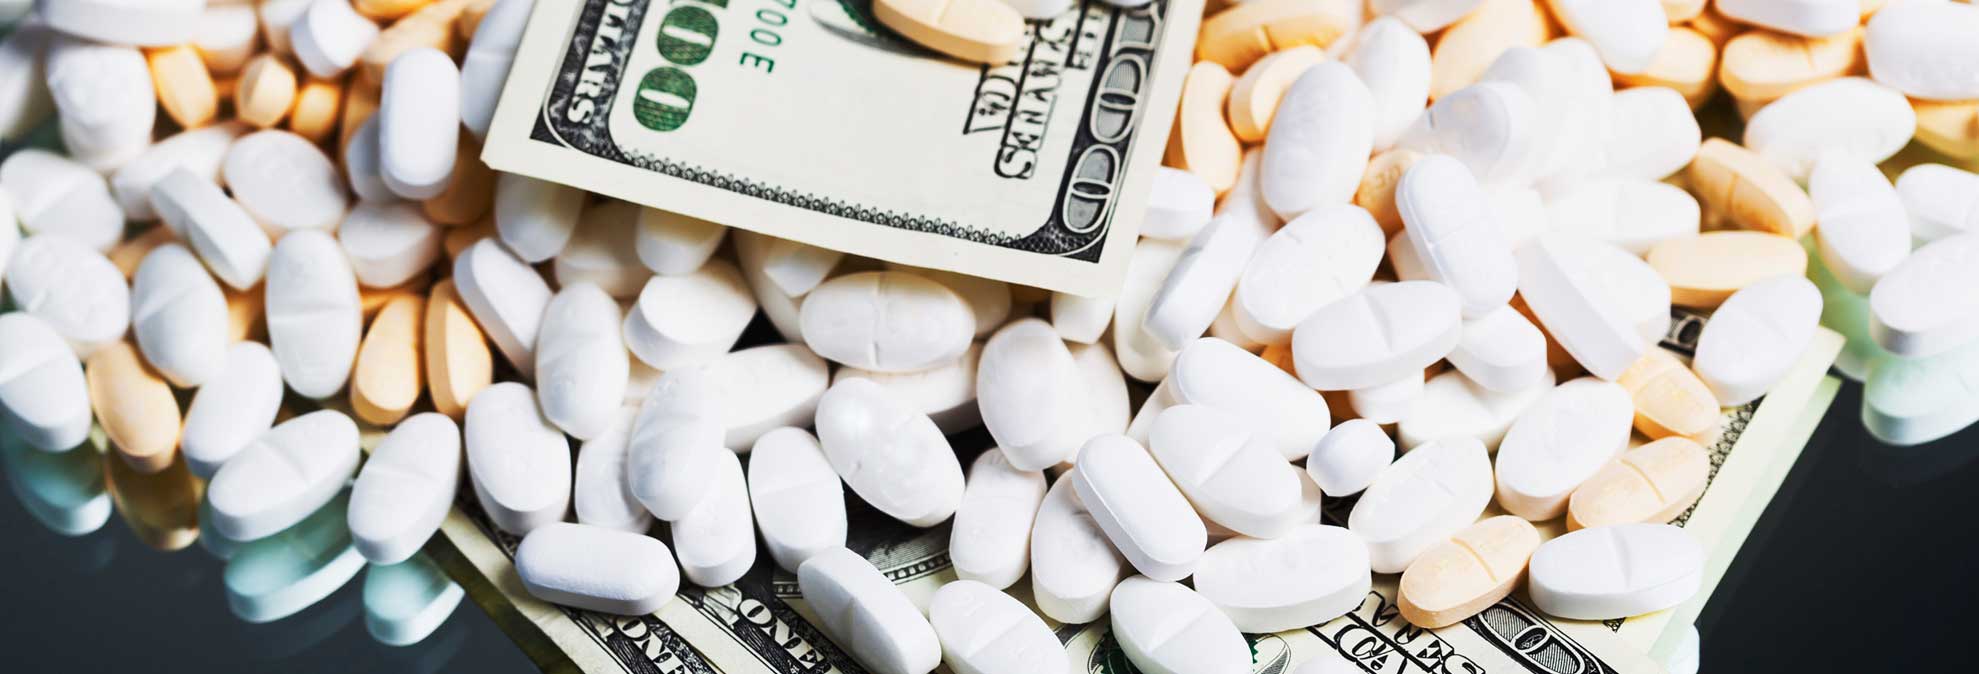 How to Find the Best Price for Your Prescription